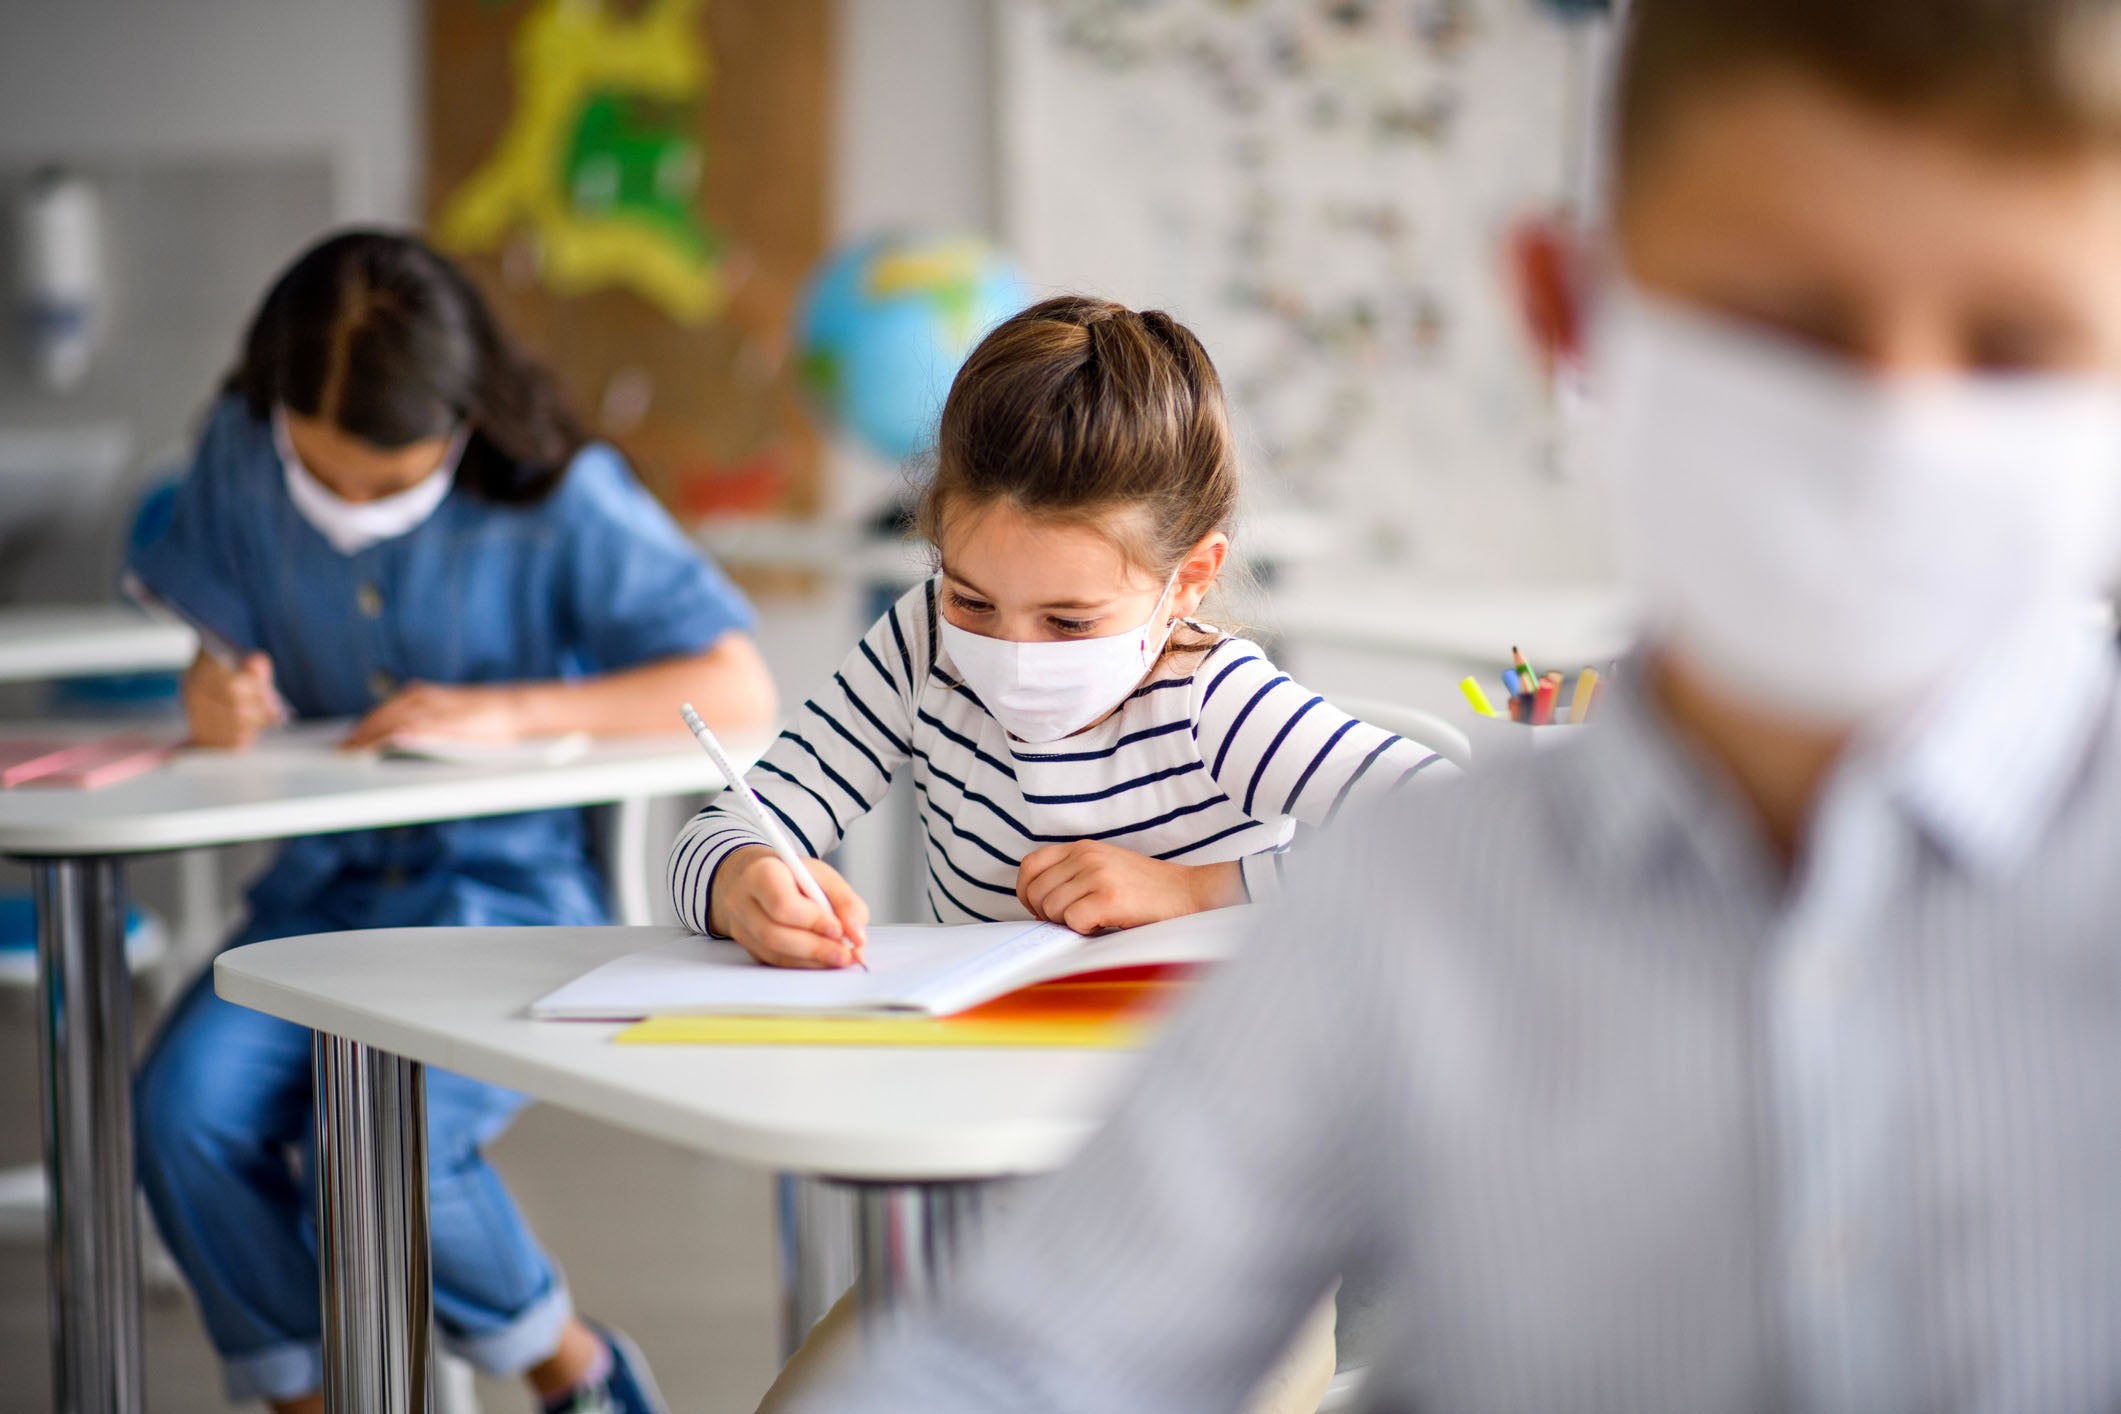 Young children wearing face masks sitting at desks writing in a classroom.